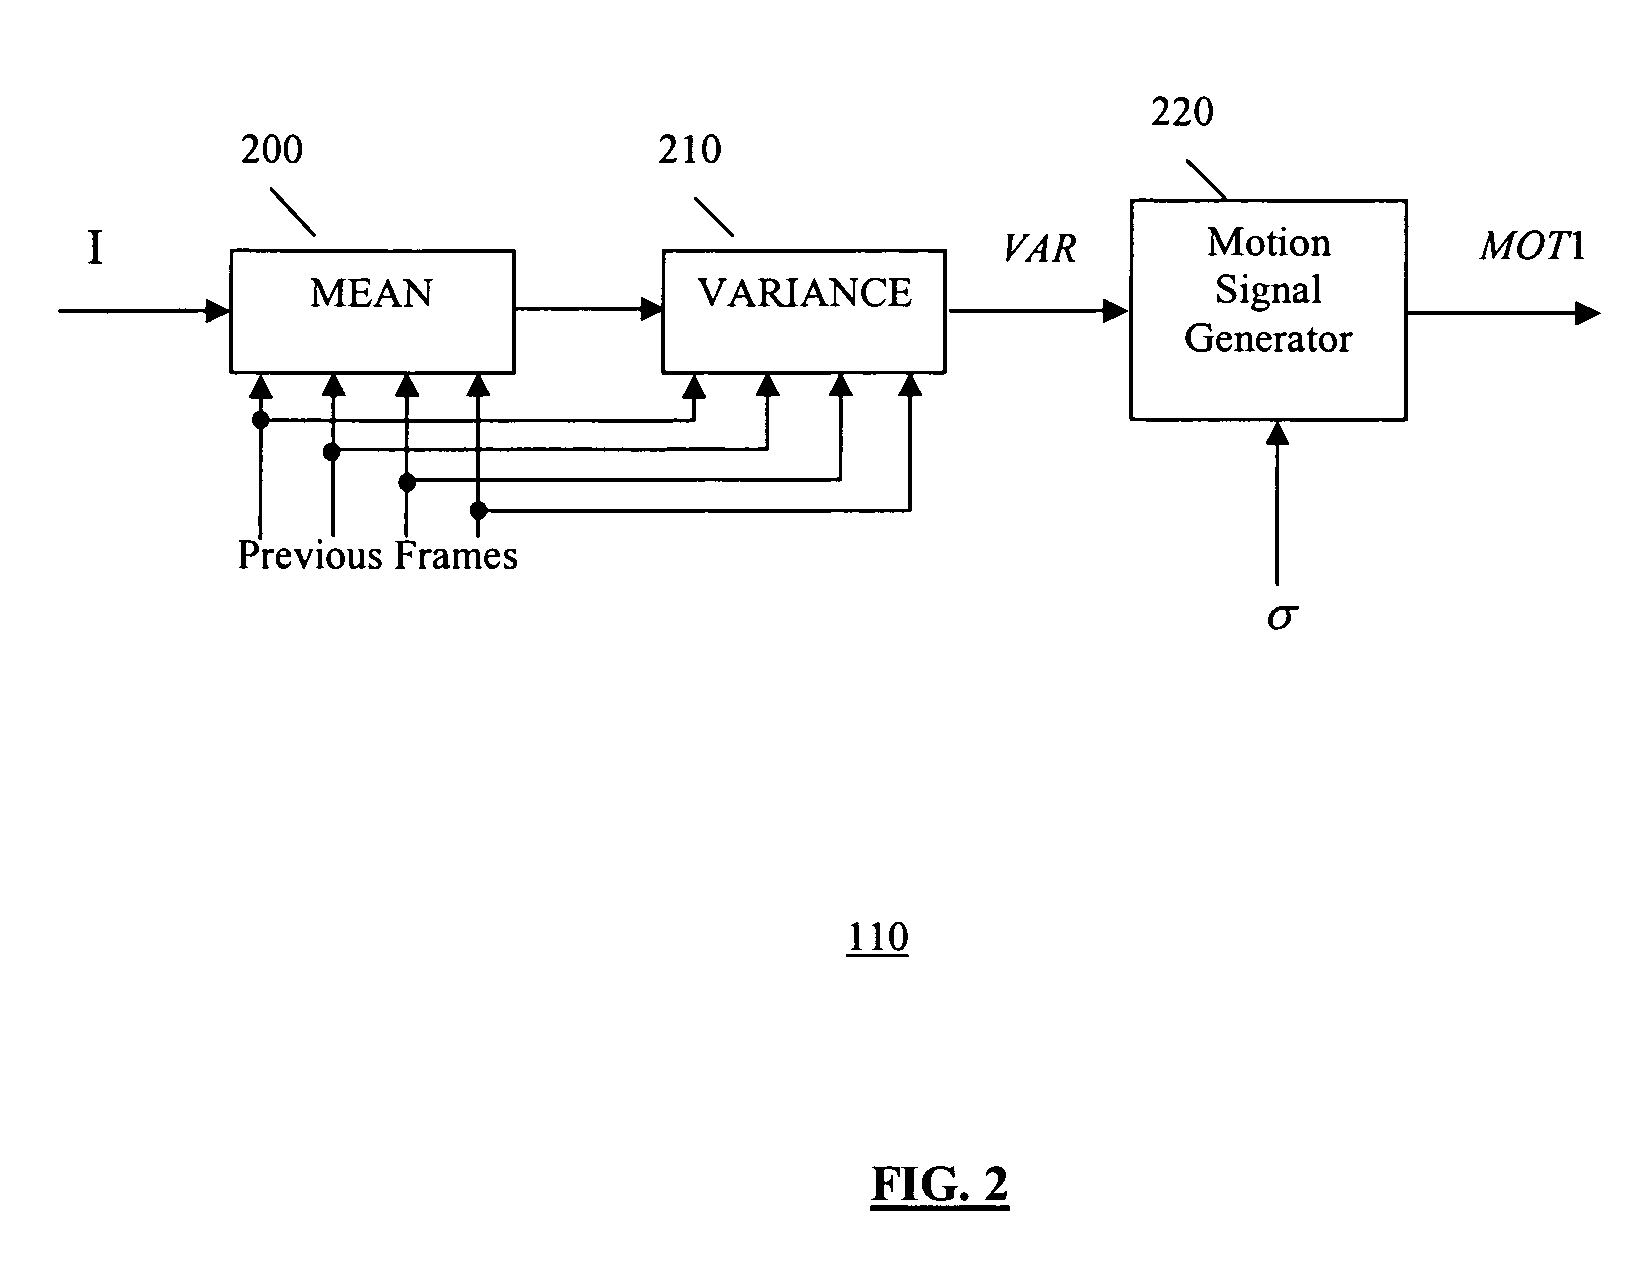 Motion adaptive noise reduction apparatus and method for video signals